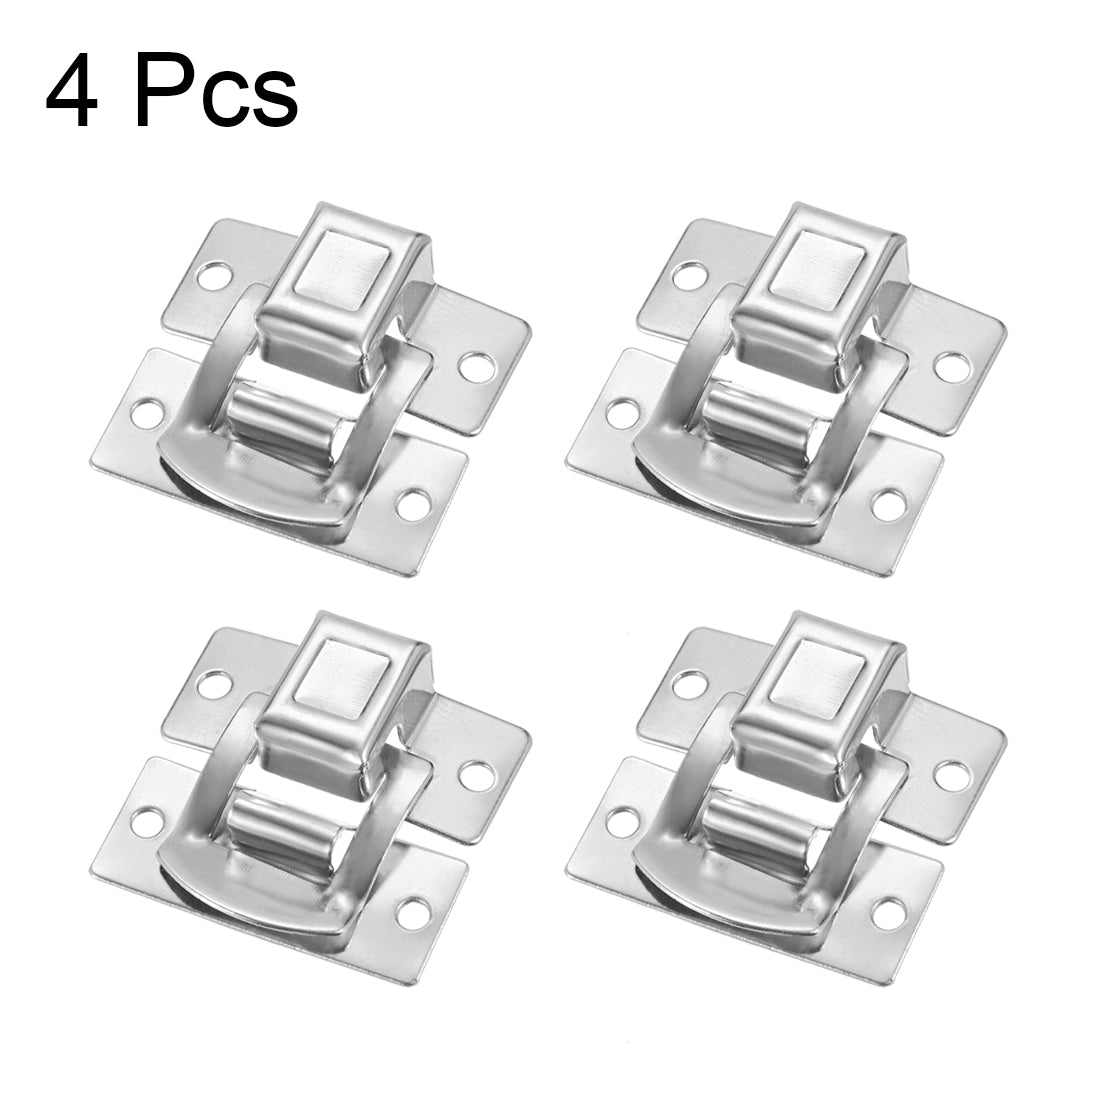 uxcell Uxcell Box Latch, Small Size Silver Tone Hasp Jewelry cases Catch w Screws 4 Pcs